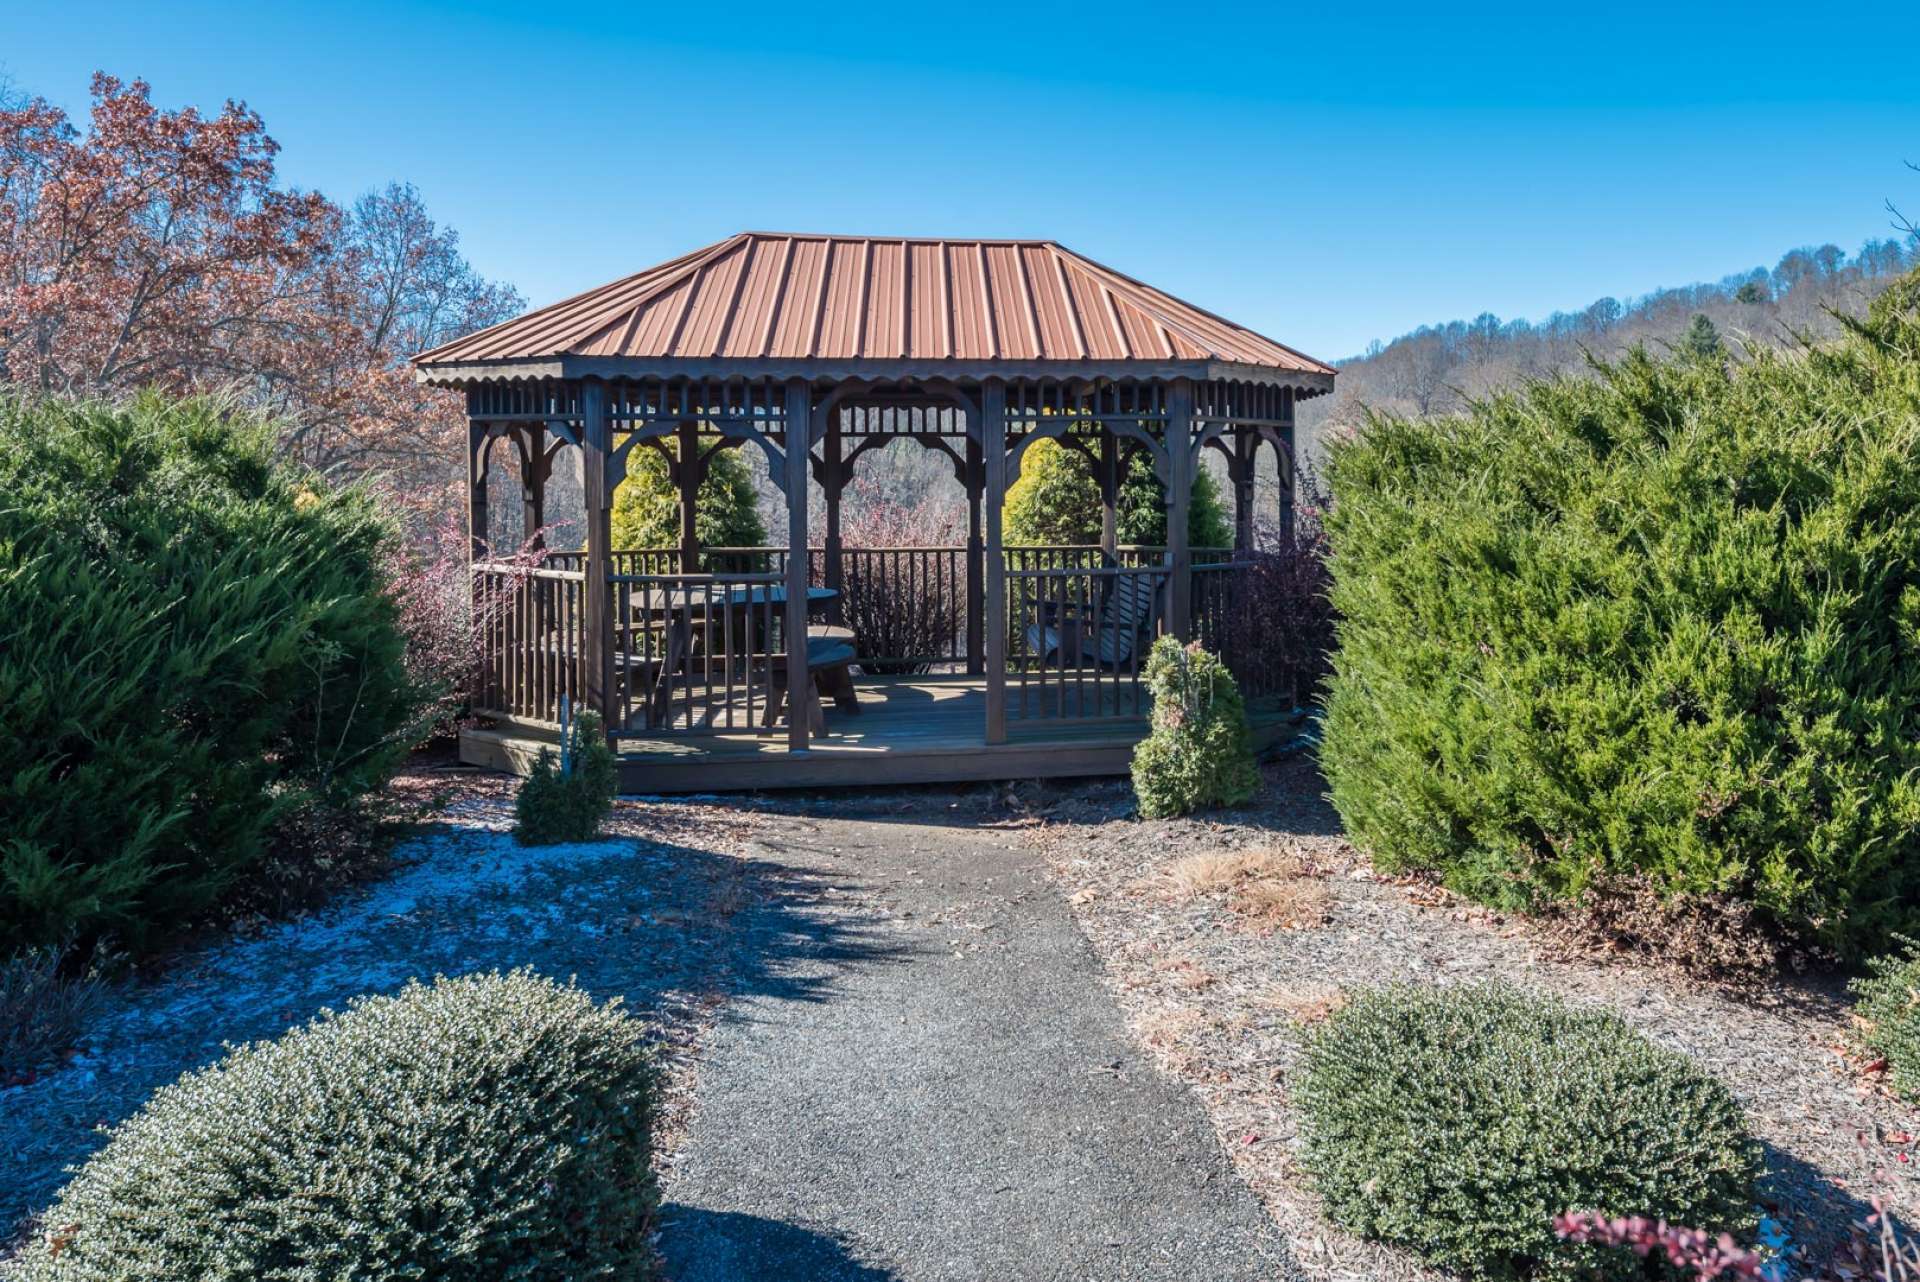 Or, bring a picnic lunch to the gazebo.